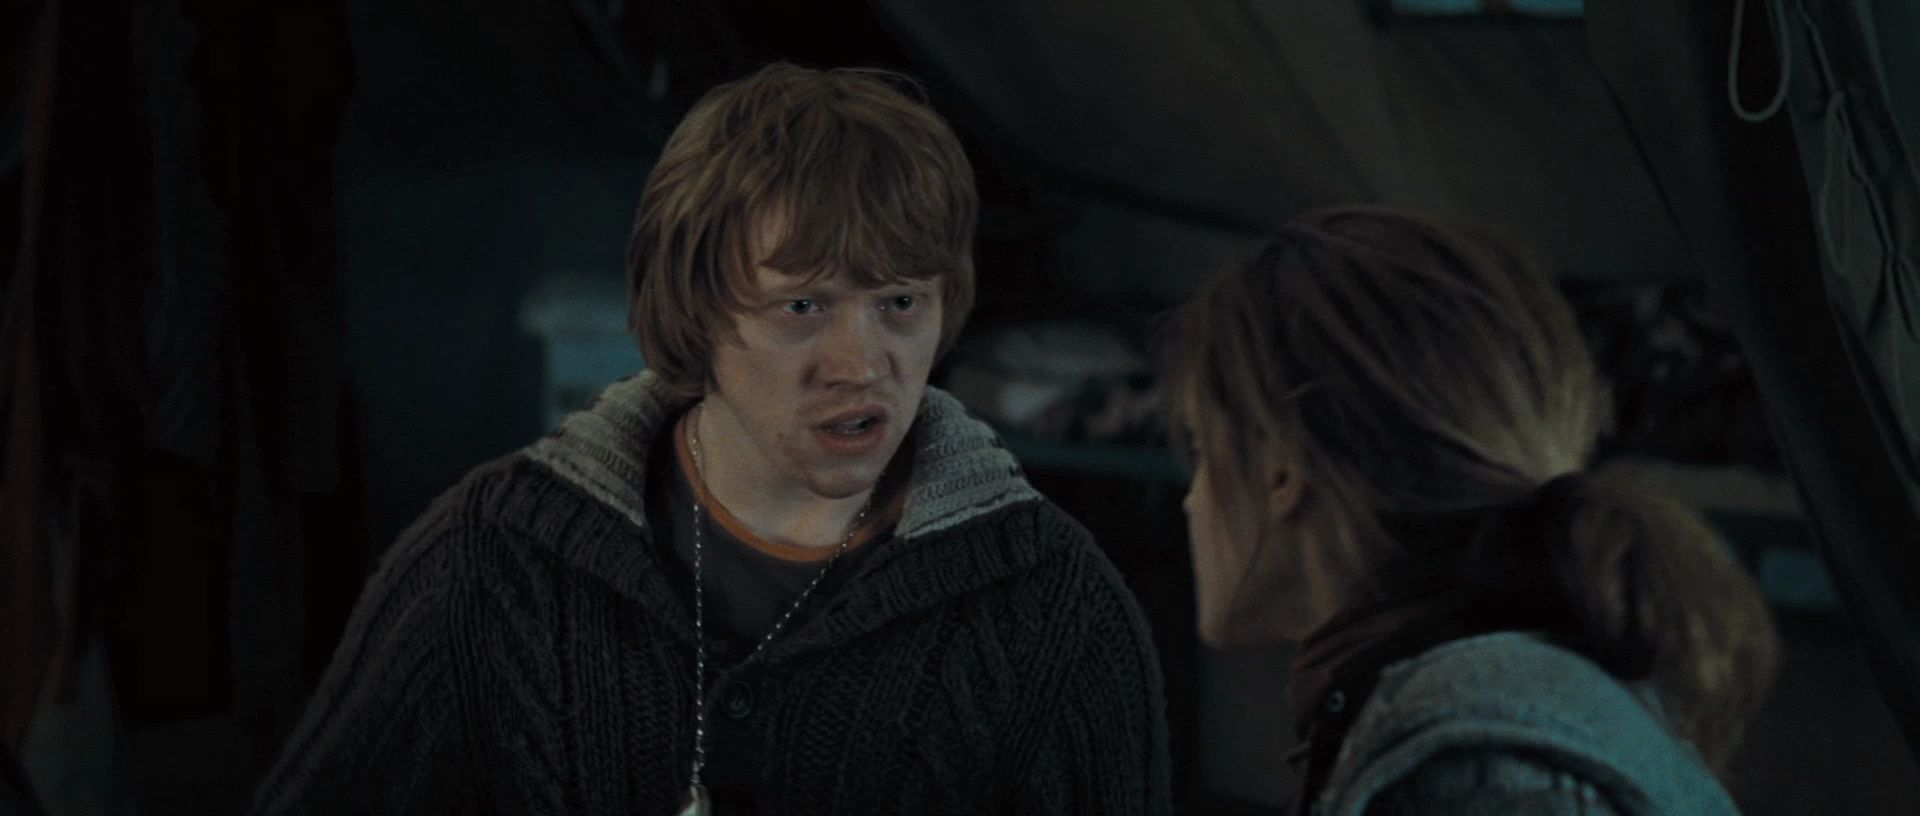 Romione Image: Harry Potter and the Deathly Hallows: Clip "You Hav...